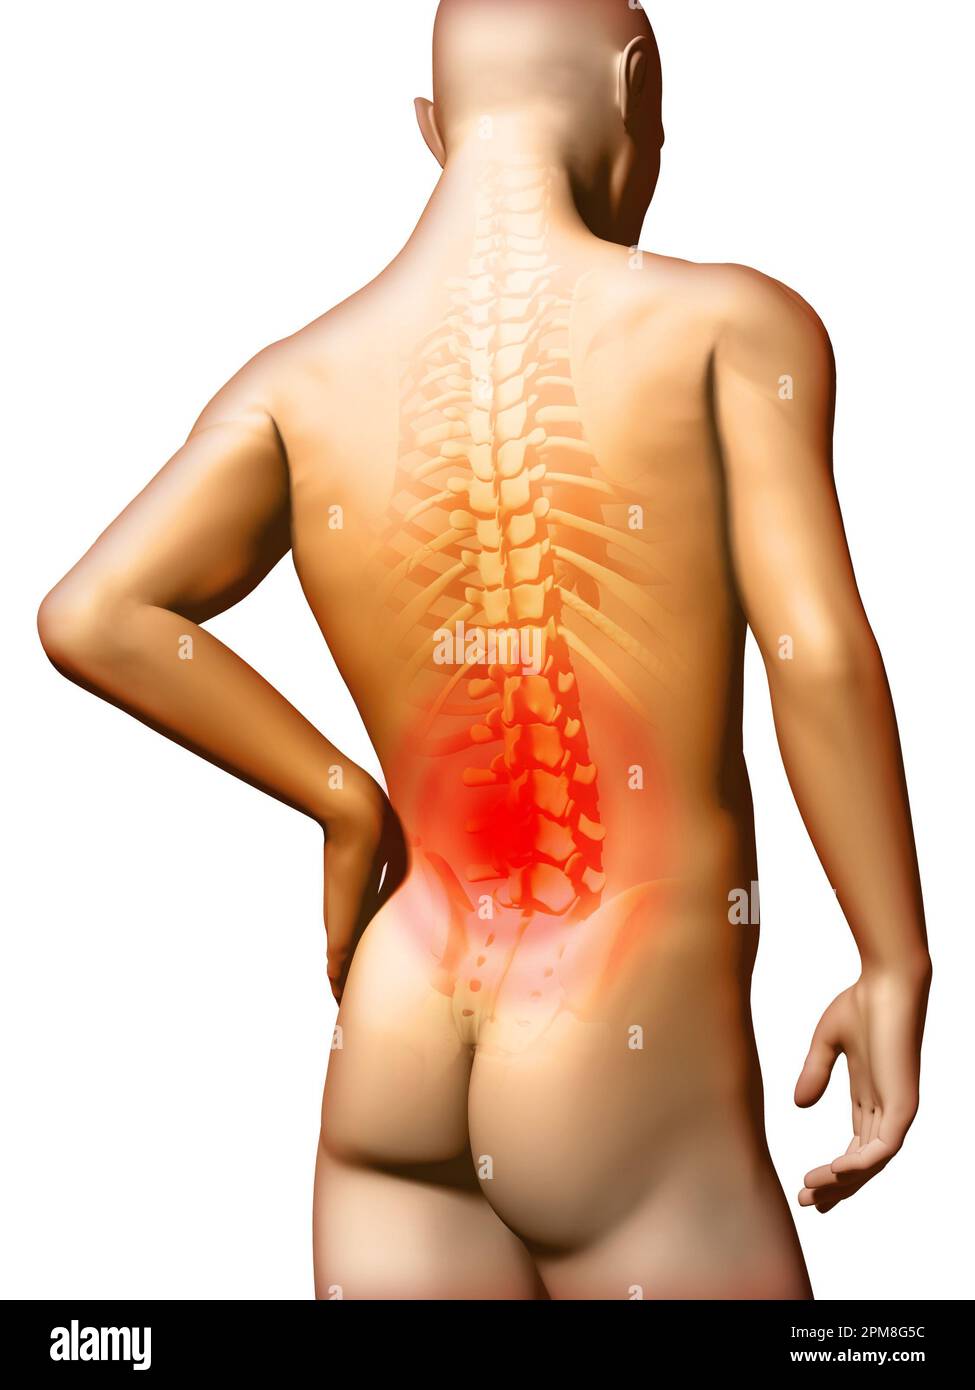 Back-pain located in the lumbar area. Digital illustration, clipping path included. Stock Photo